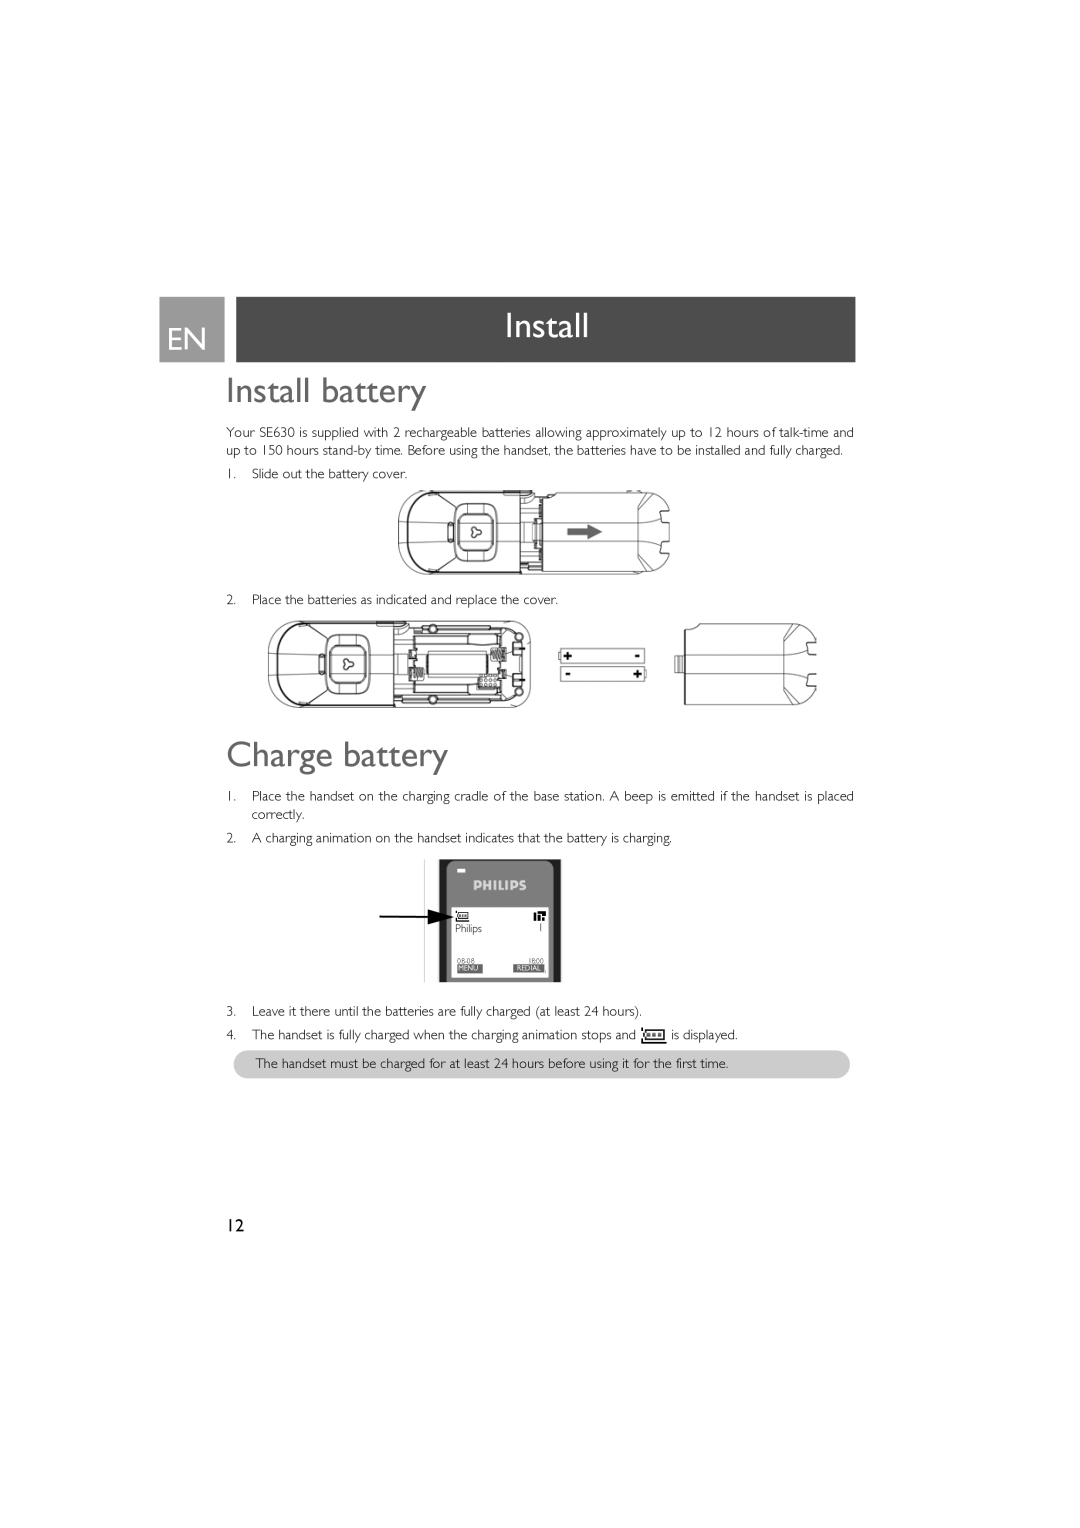 Philips SE630 manual ENInstall, Install battery, Charge battery 